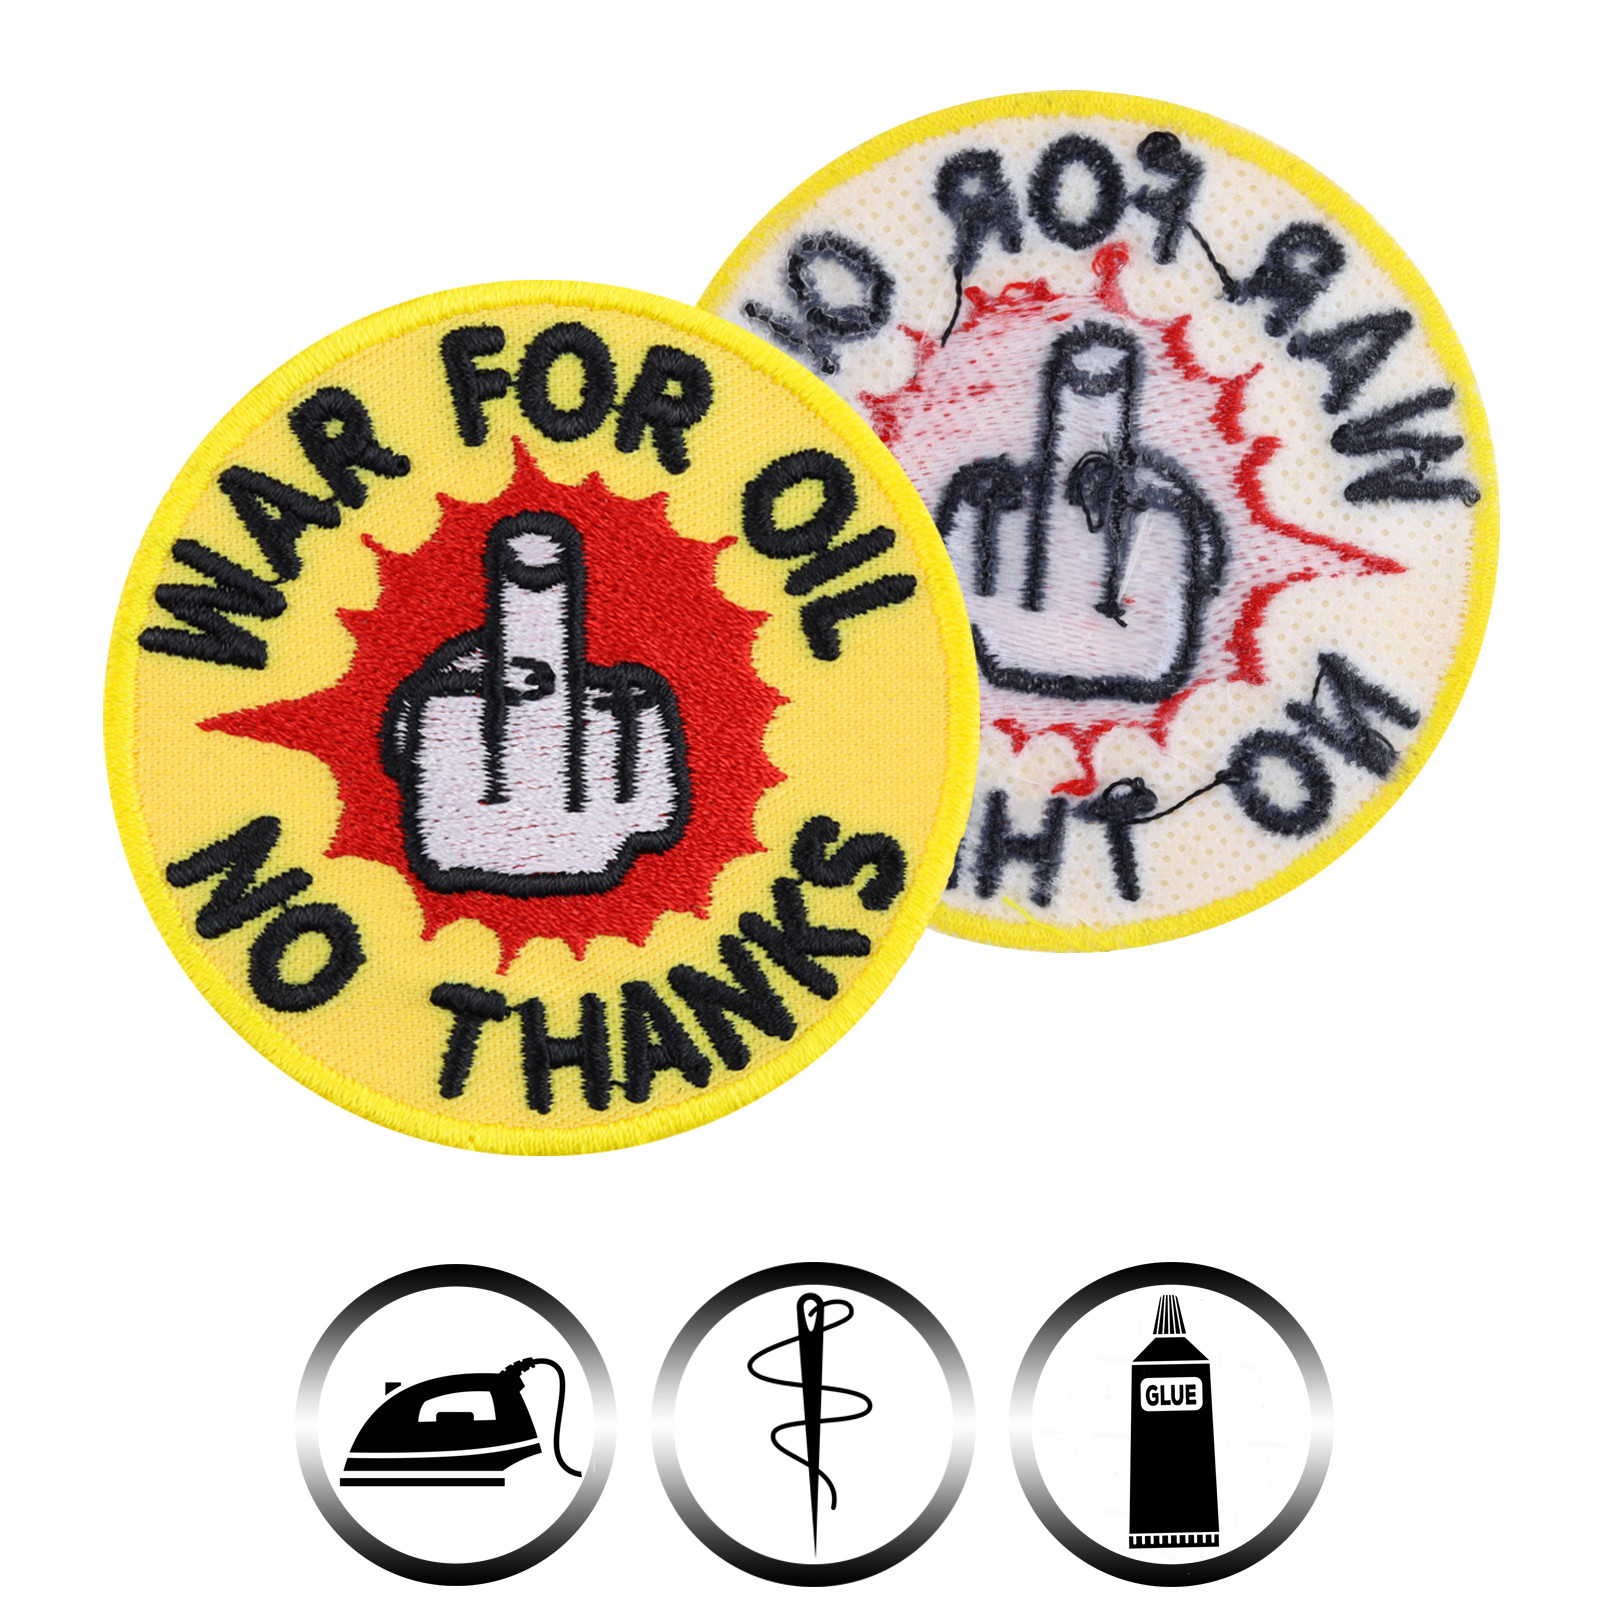 War for oil - No thanks - Patch